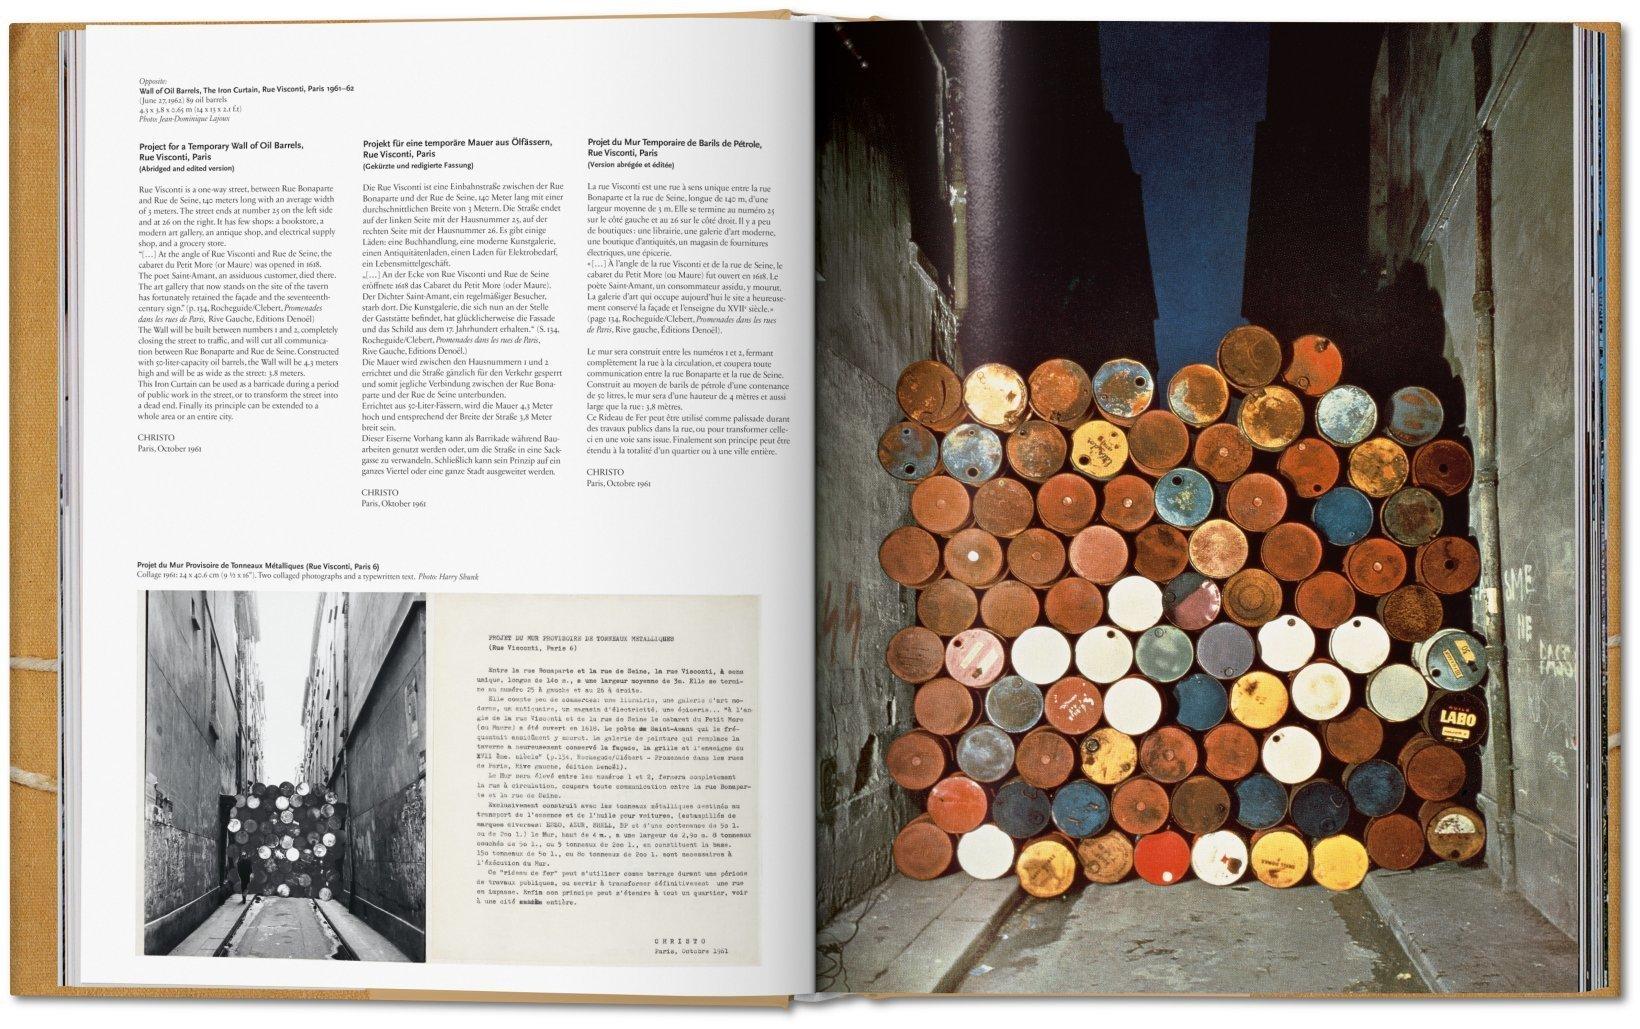 First available as a signed Collector’s Edition designed by Christo himself, this updated extra large edition is the most comprehensive overview of Christo and Jeanne-Claude to date. Hundreds of photographs and drawings trace the couple’s